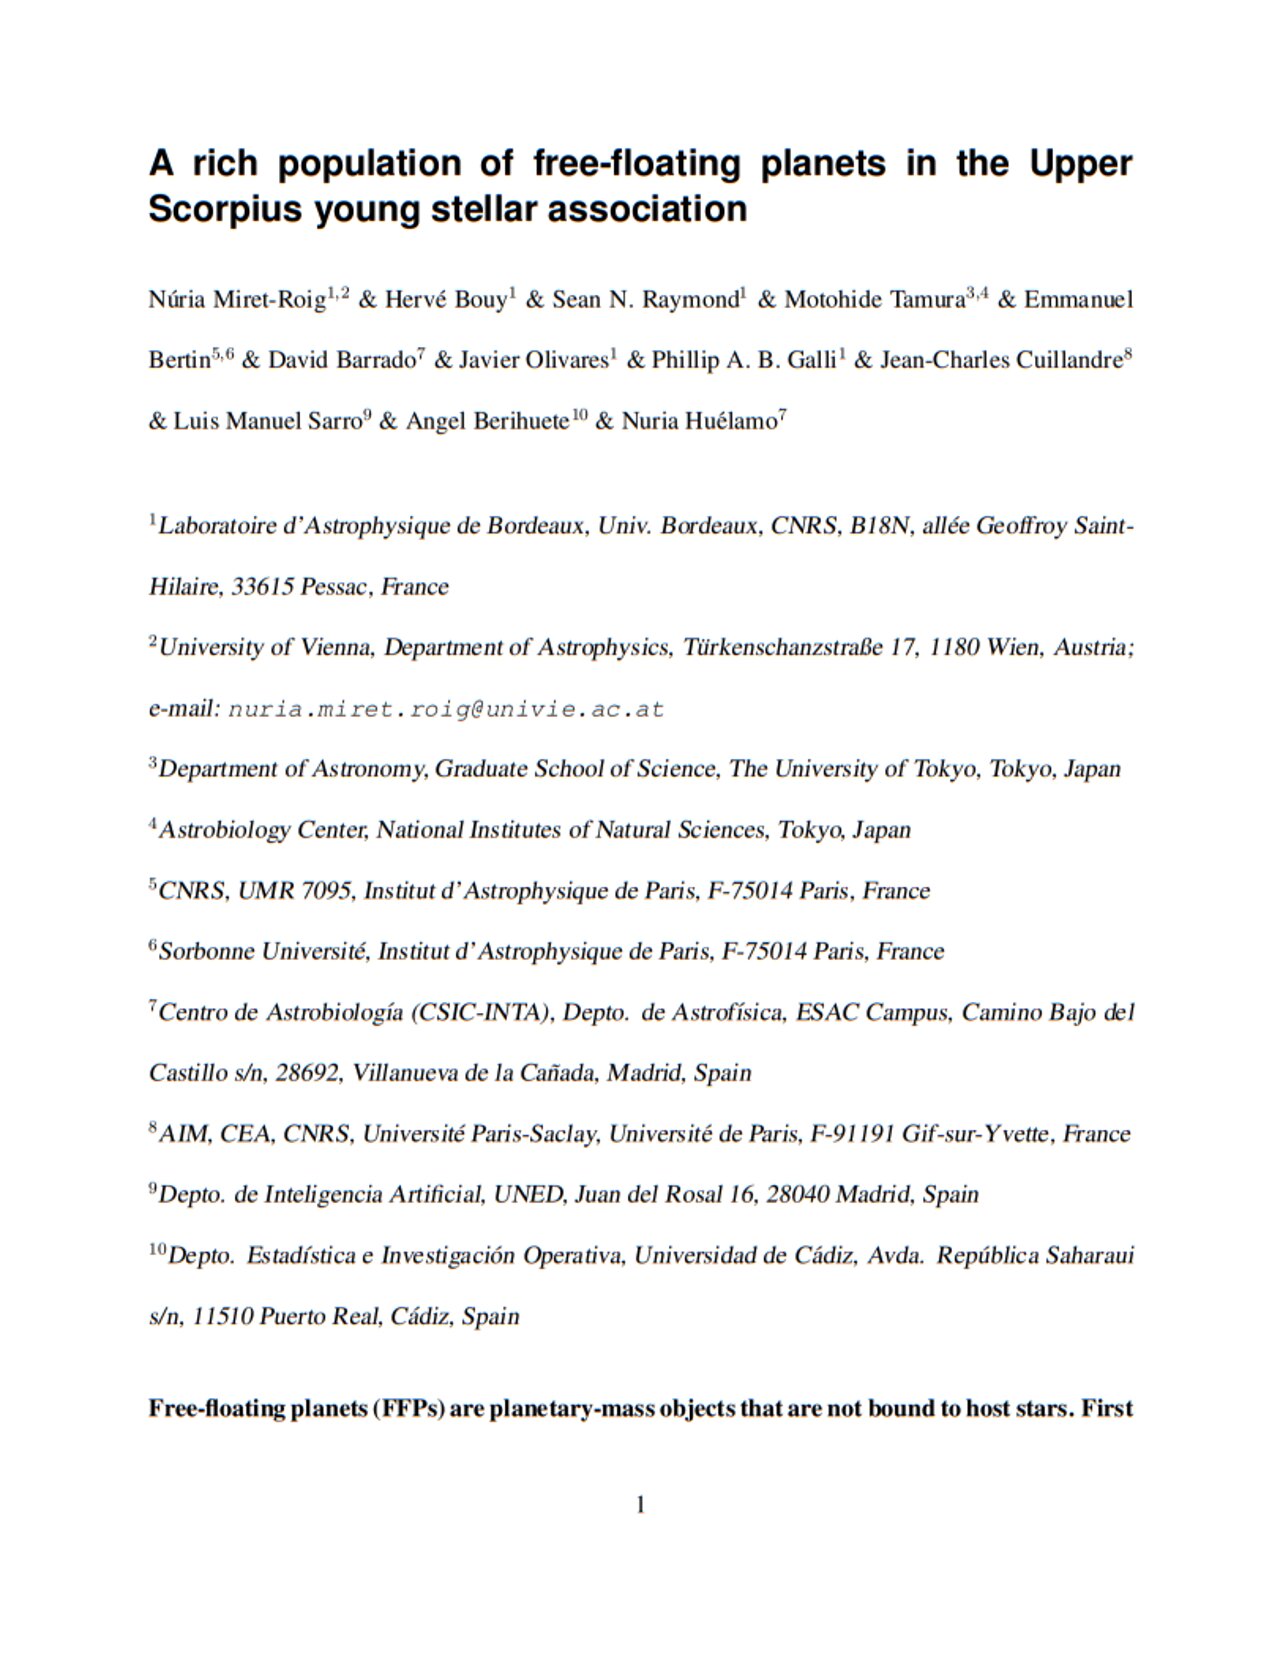 Technical Document: A rich population of free-floating planets in the Upper Scorpius young stellar association